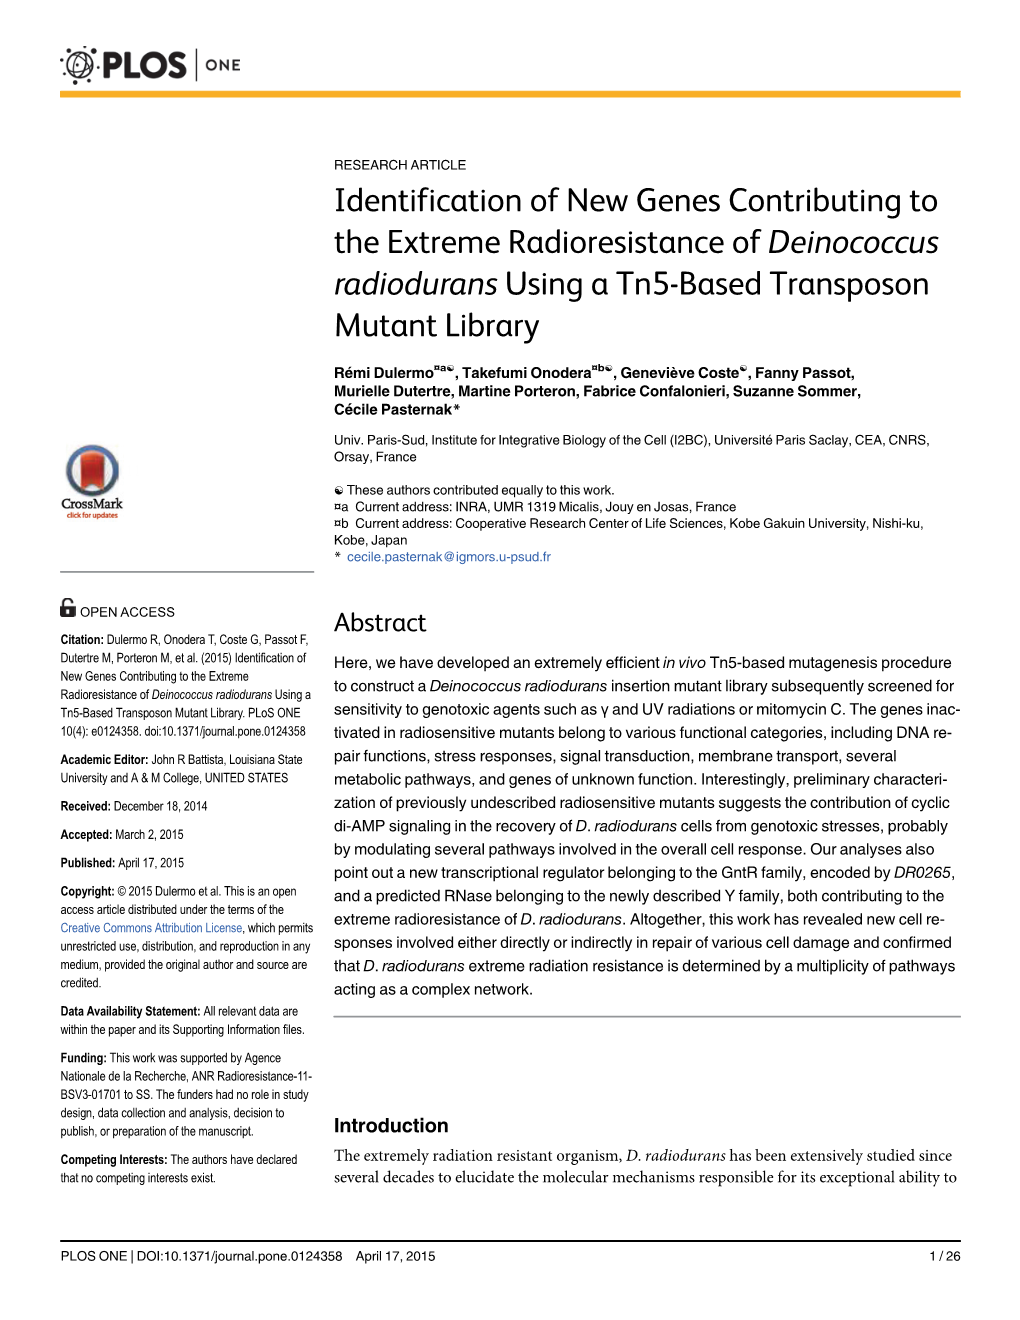 Identification of New Genes Contributing to the Extreme Radioresistance of Deinococcus Radiodurans Using a Tn5-Based Transposon Mutant Library